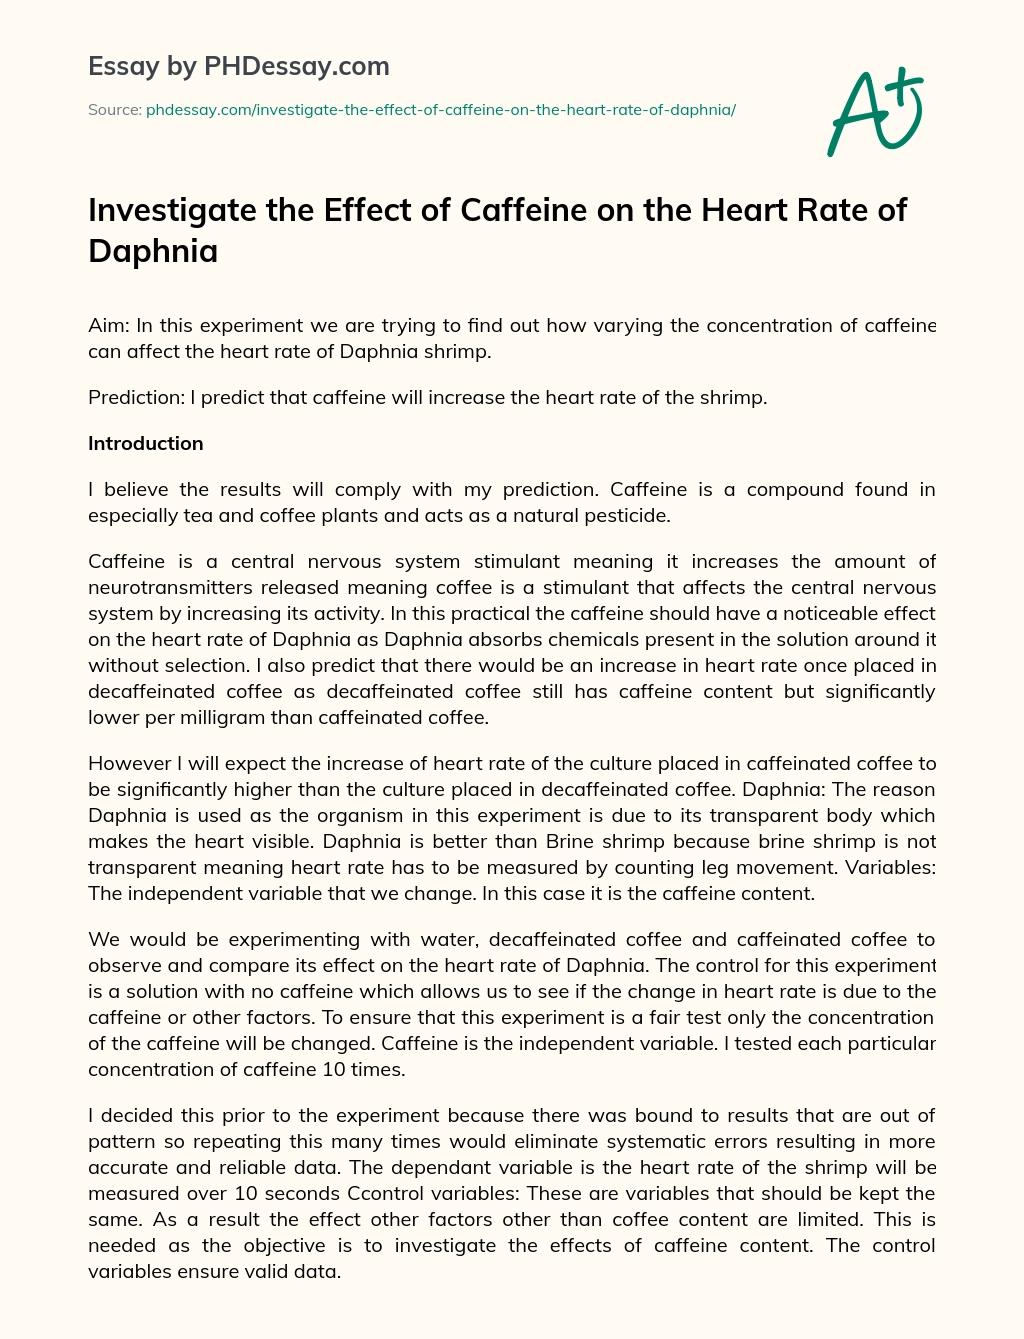 Investigate the Effect of Caffeine on the Heart Rate of Daphnia essay